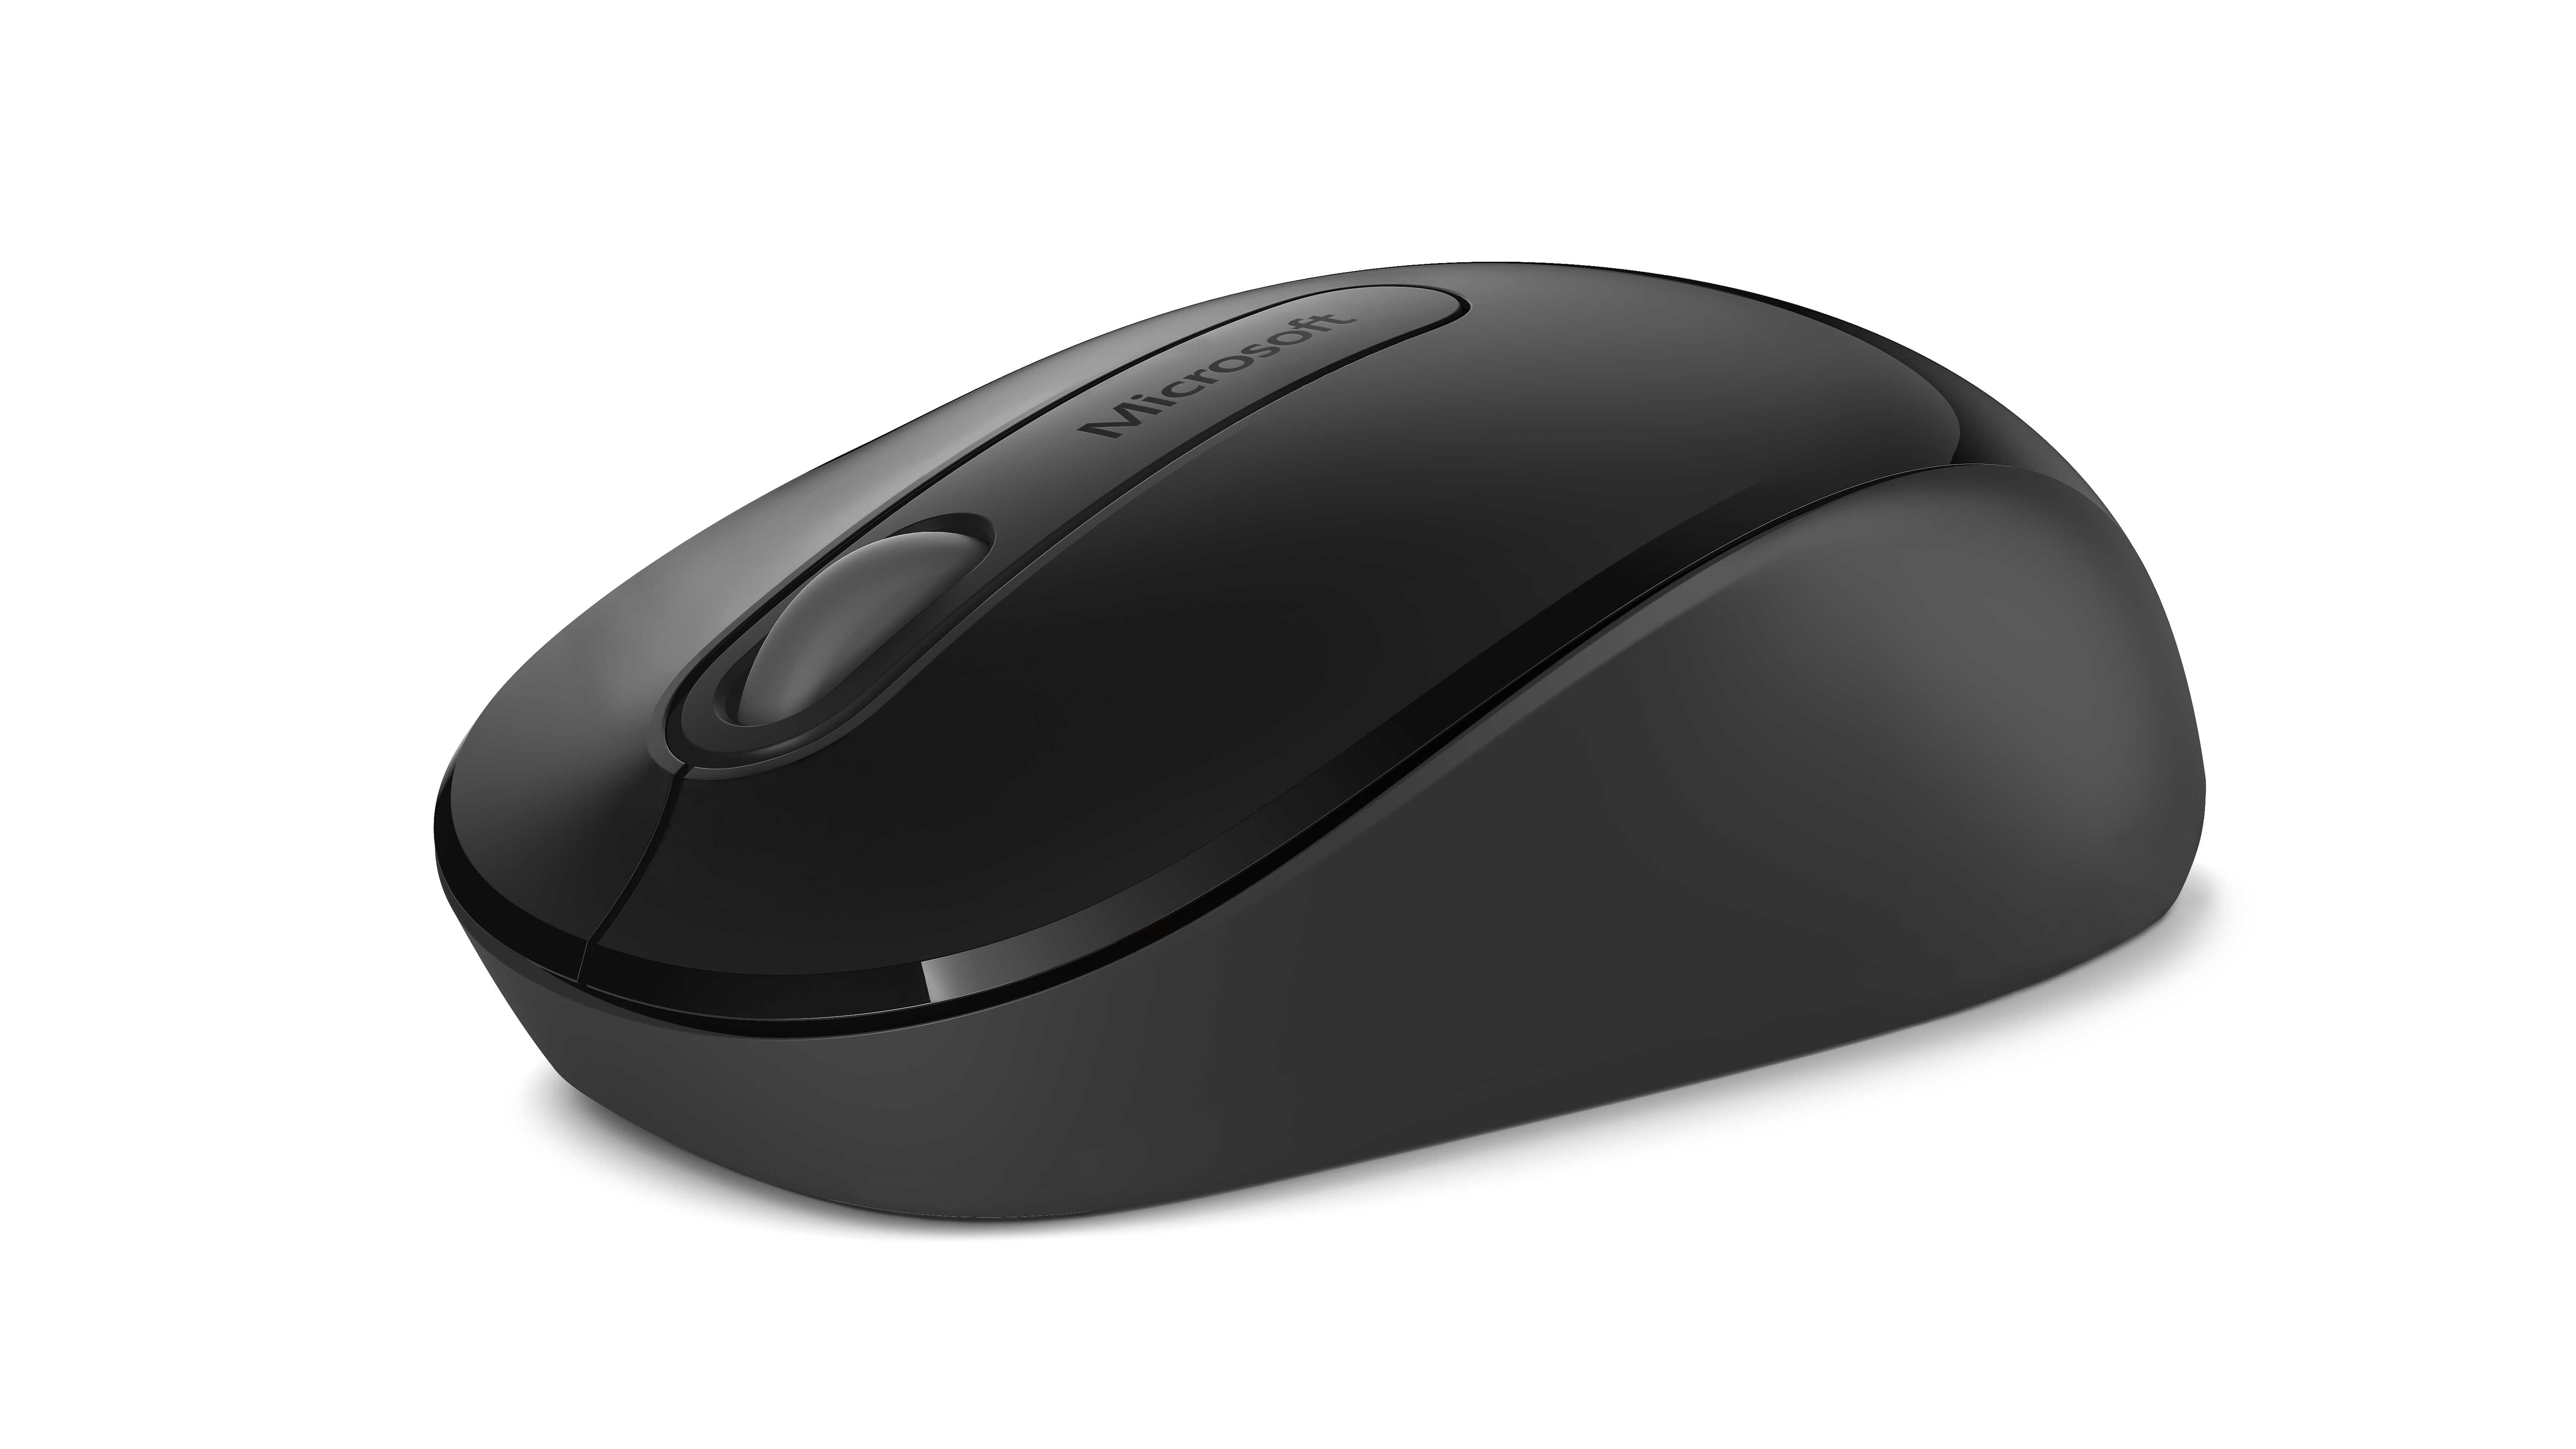 download intellipoint mouse software